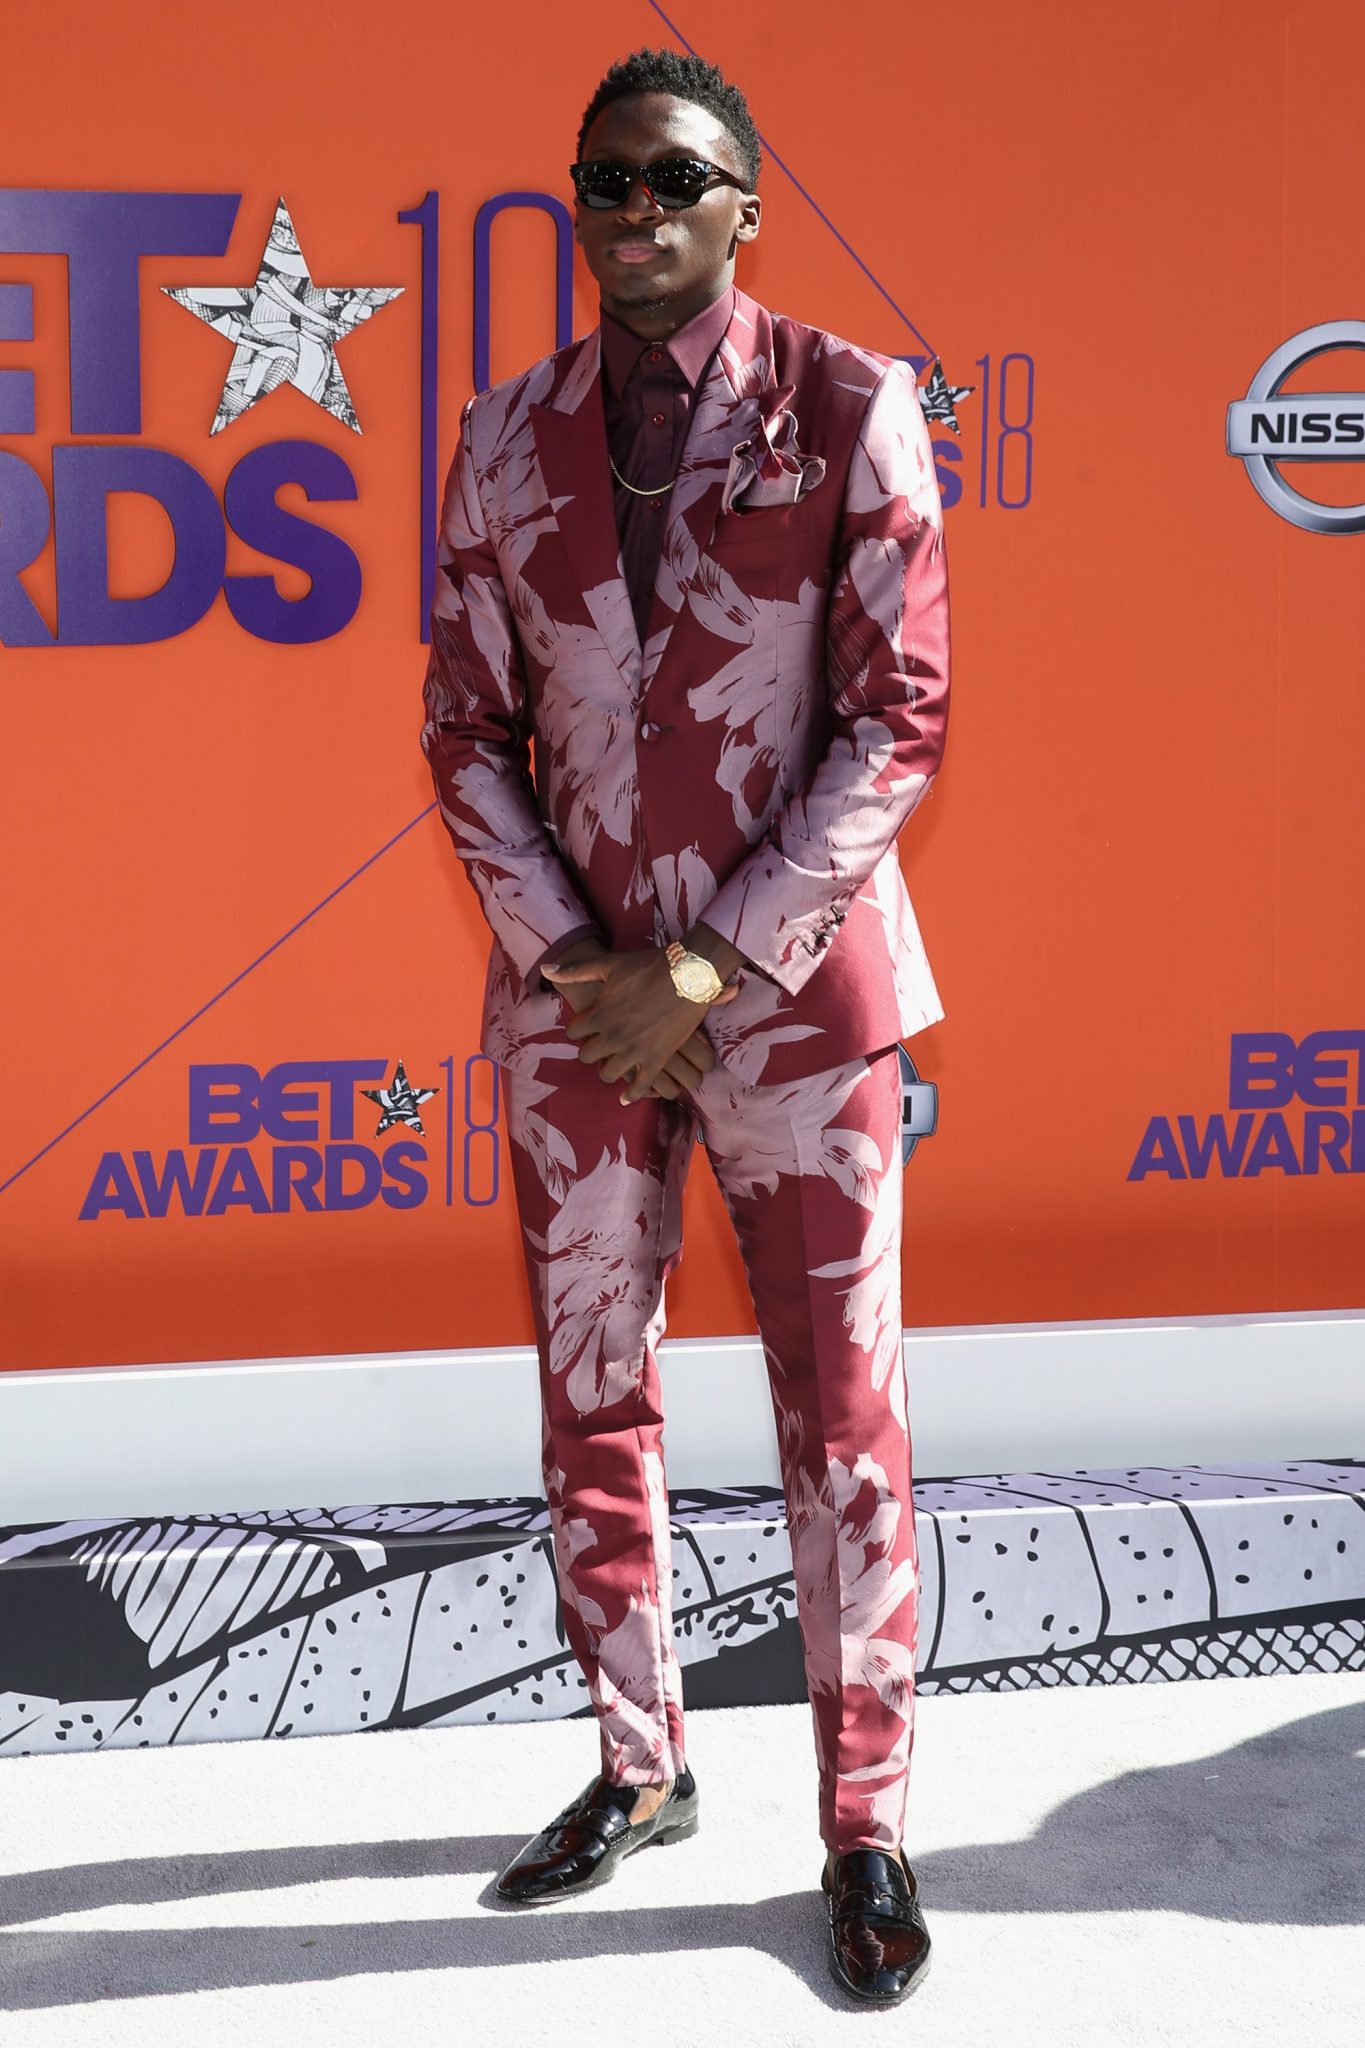 The Men Were Serving Looks At The BET Awards